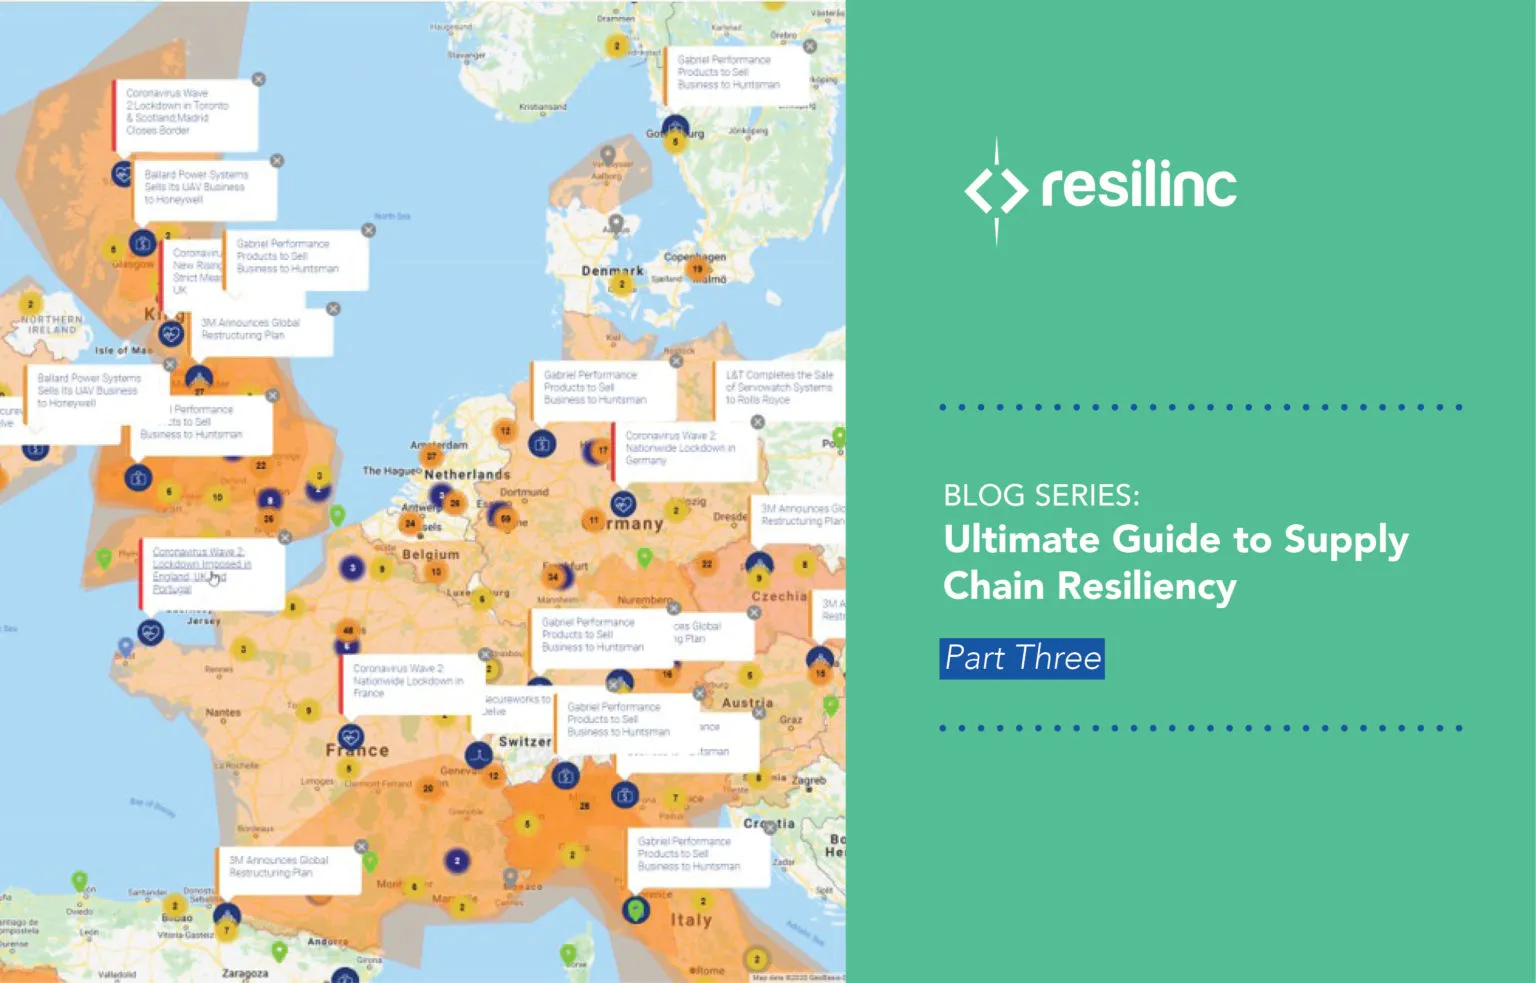 The Ultimate Guide to Supply Chain Resiliency, Part three